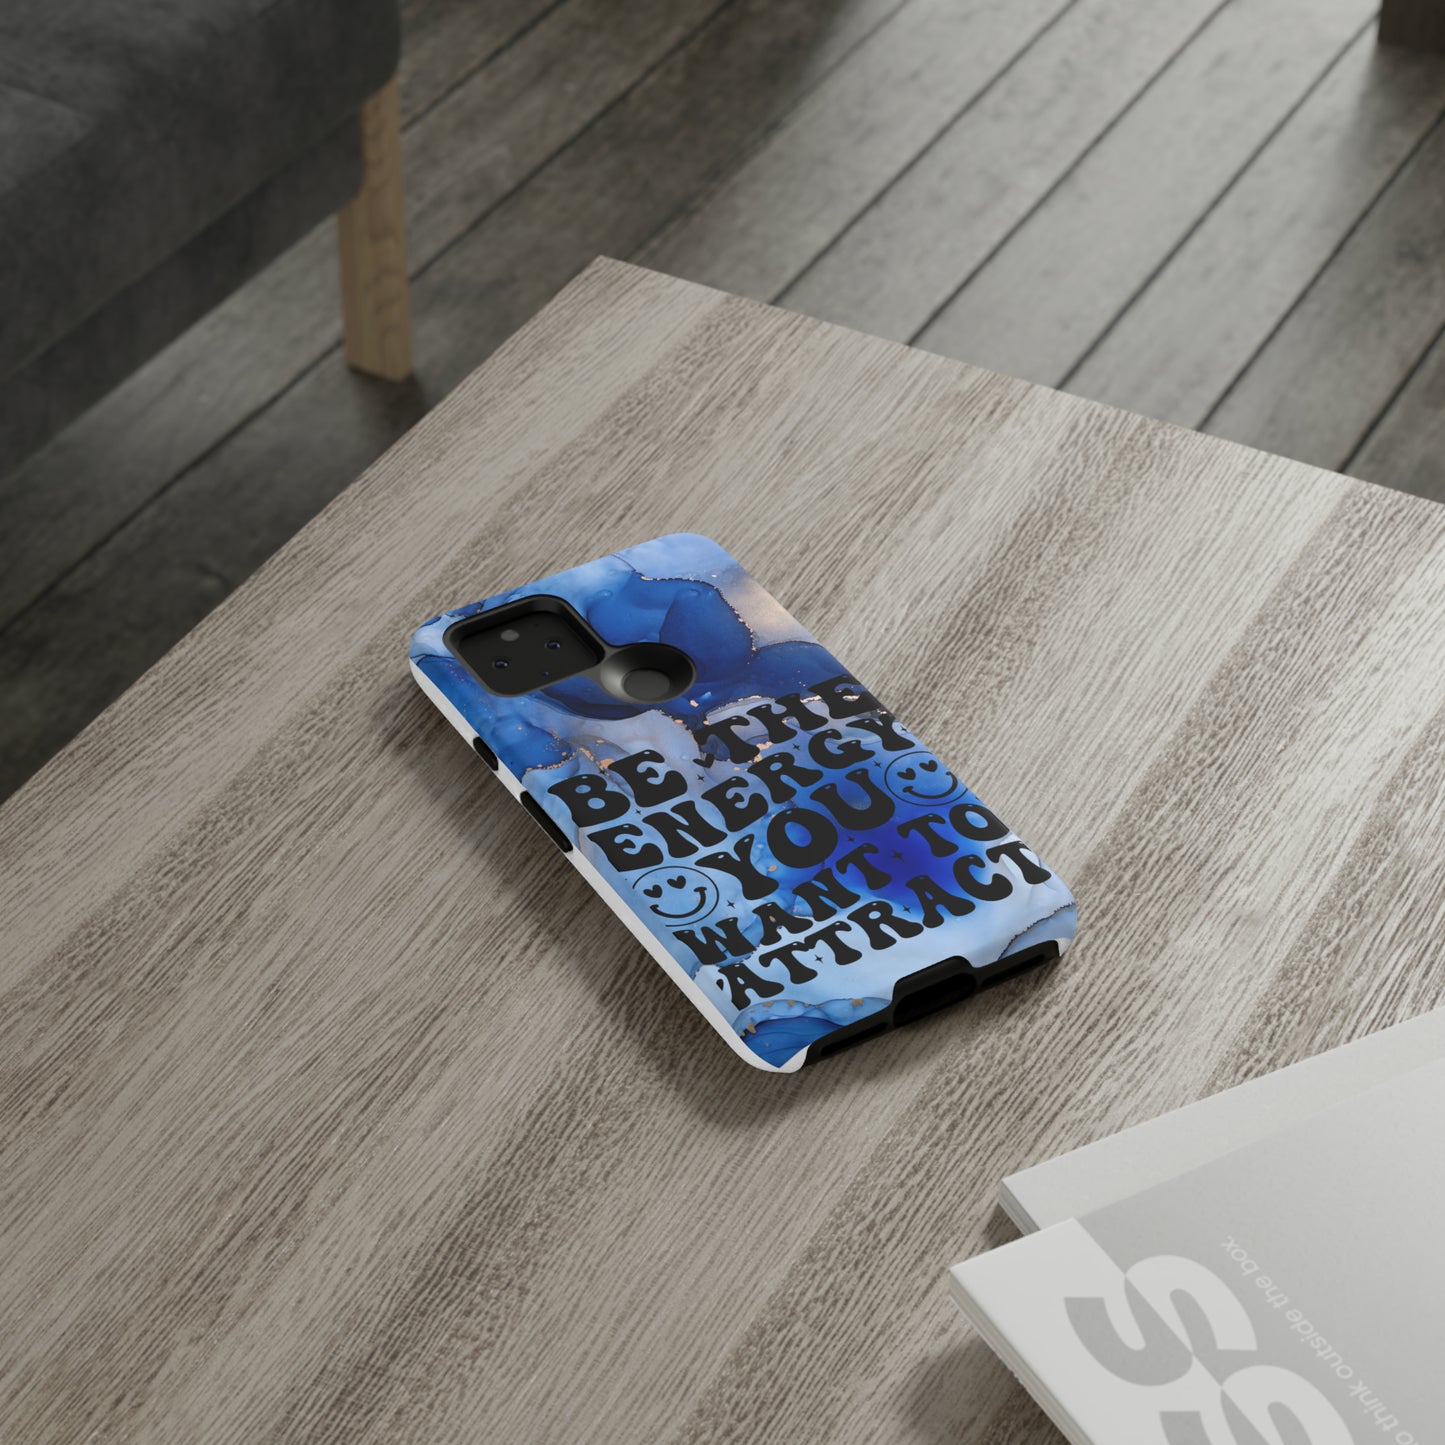 Be the energy you want to attract Tough Phone Cases